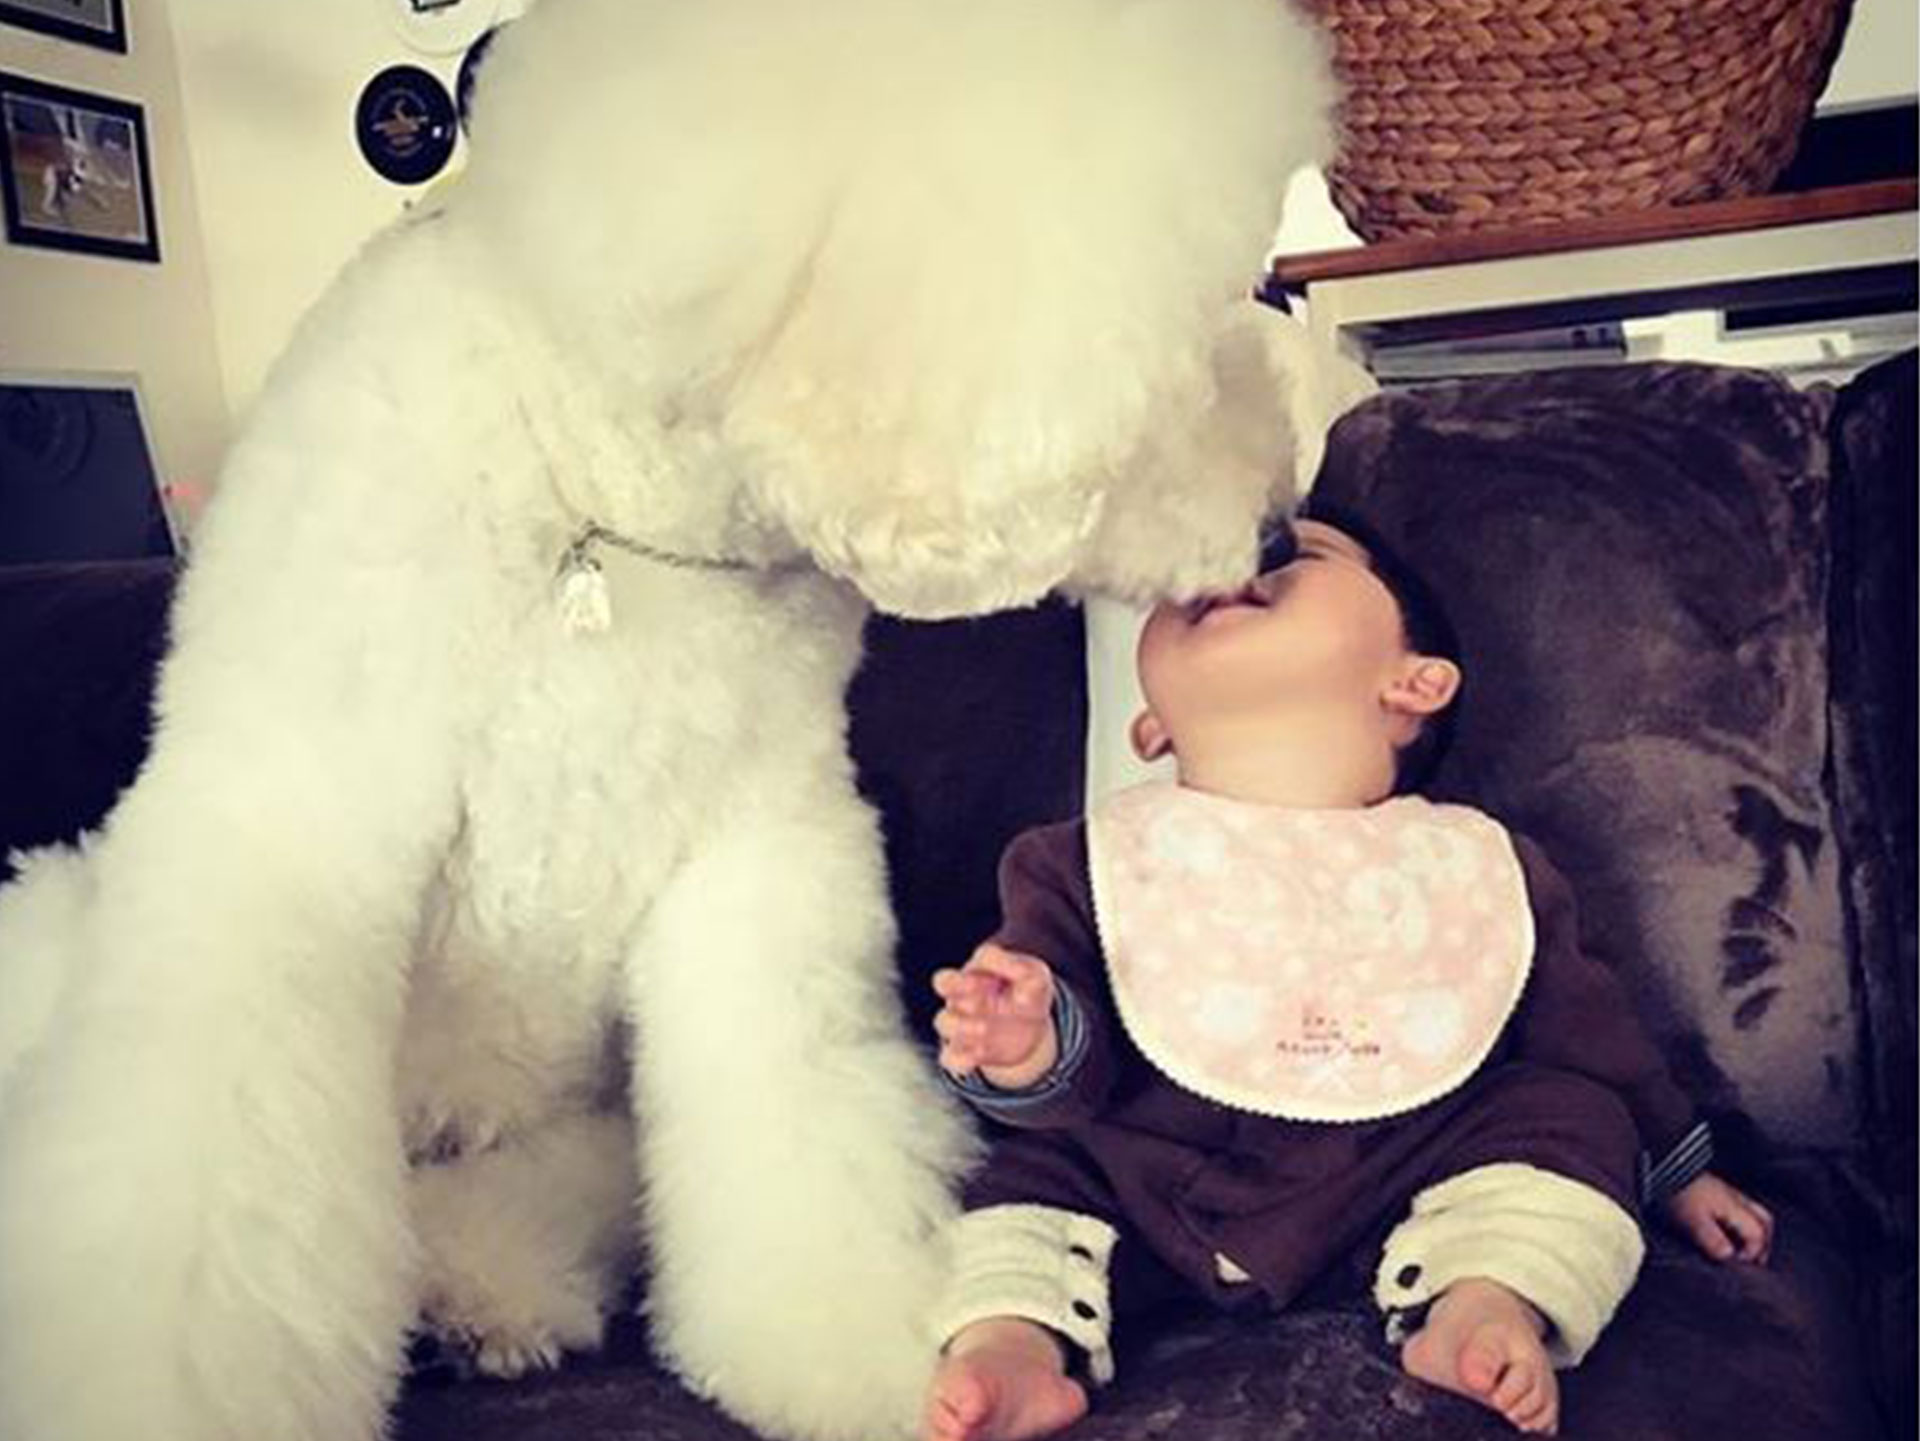 This baby and giant dog can only improve your day